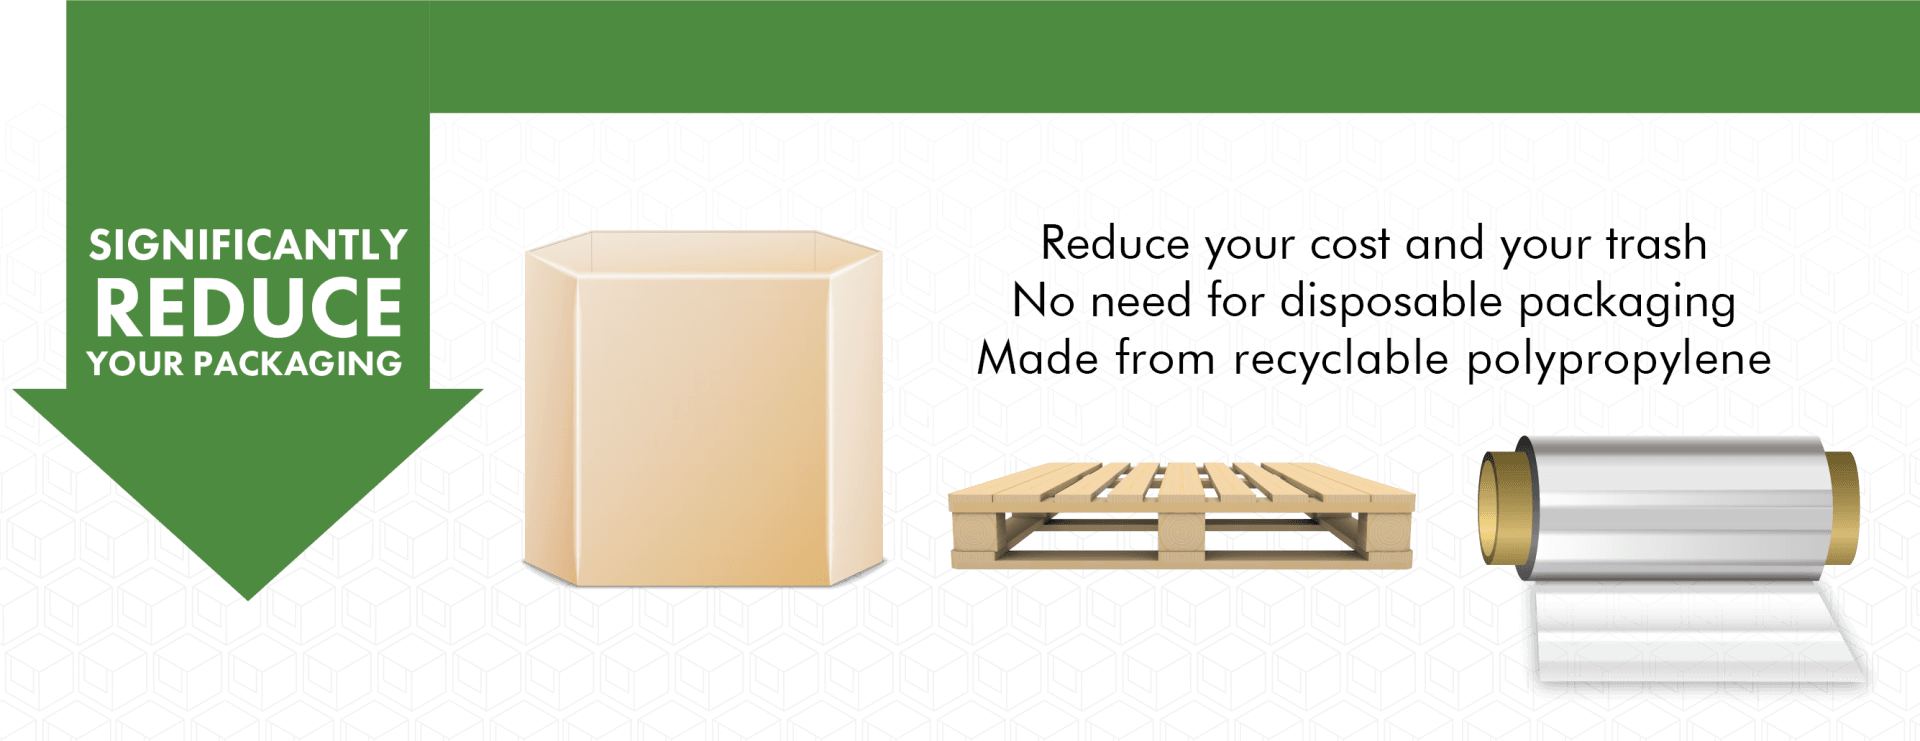 Plastic Gaylord's significantly reduce your packaging waste